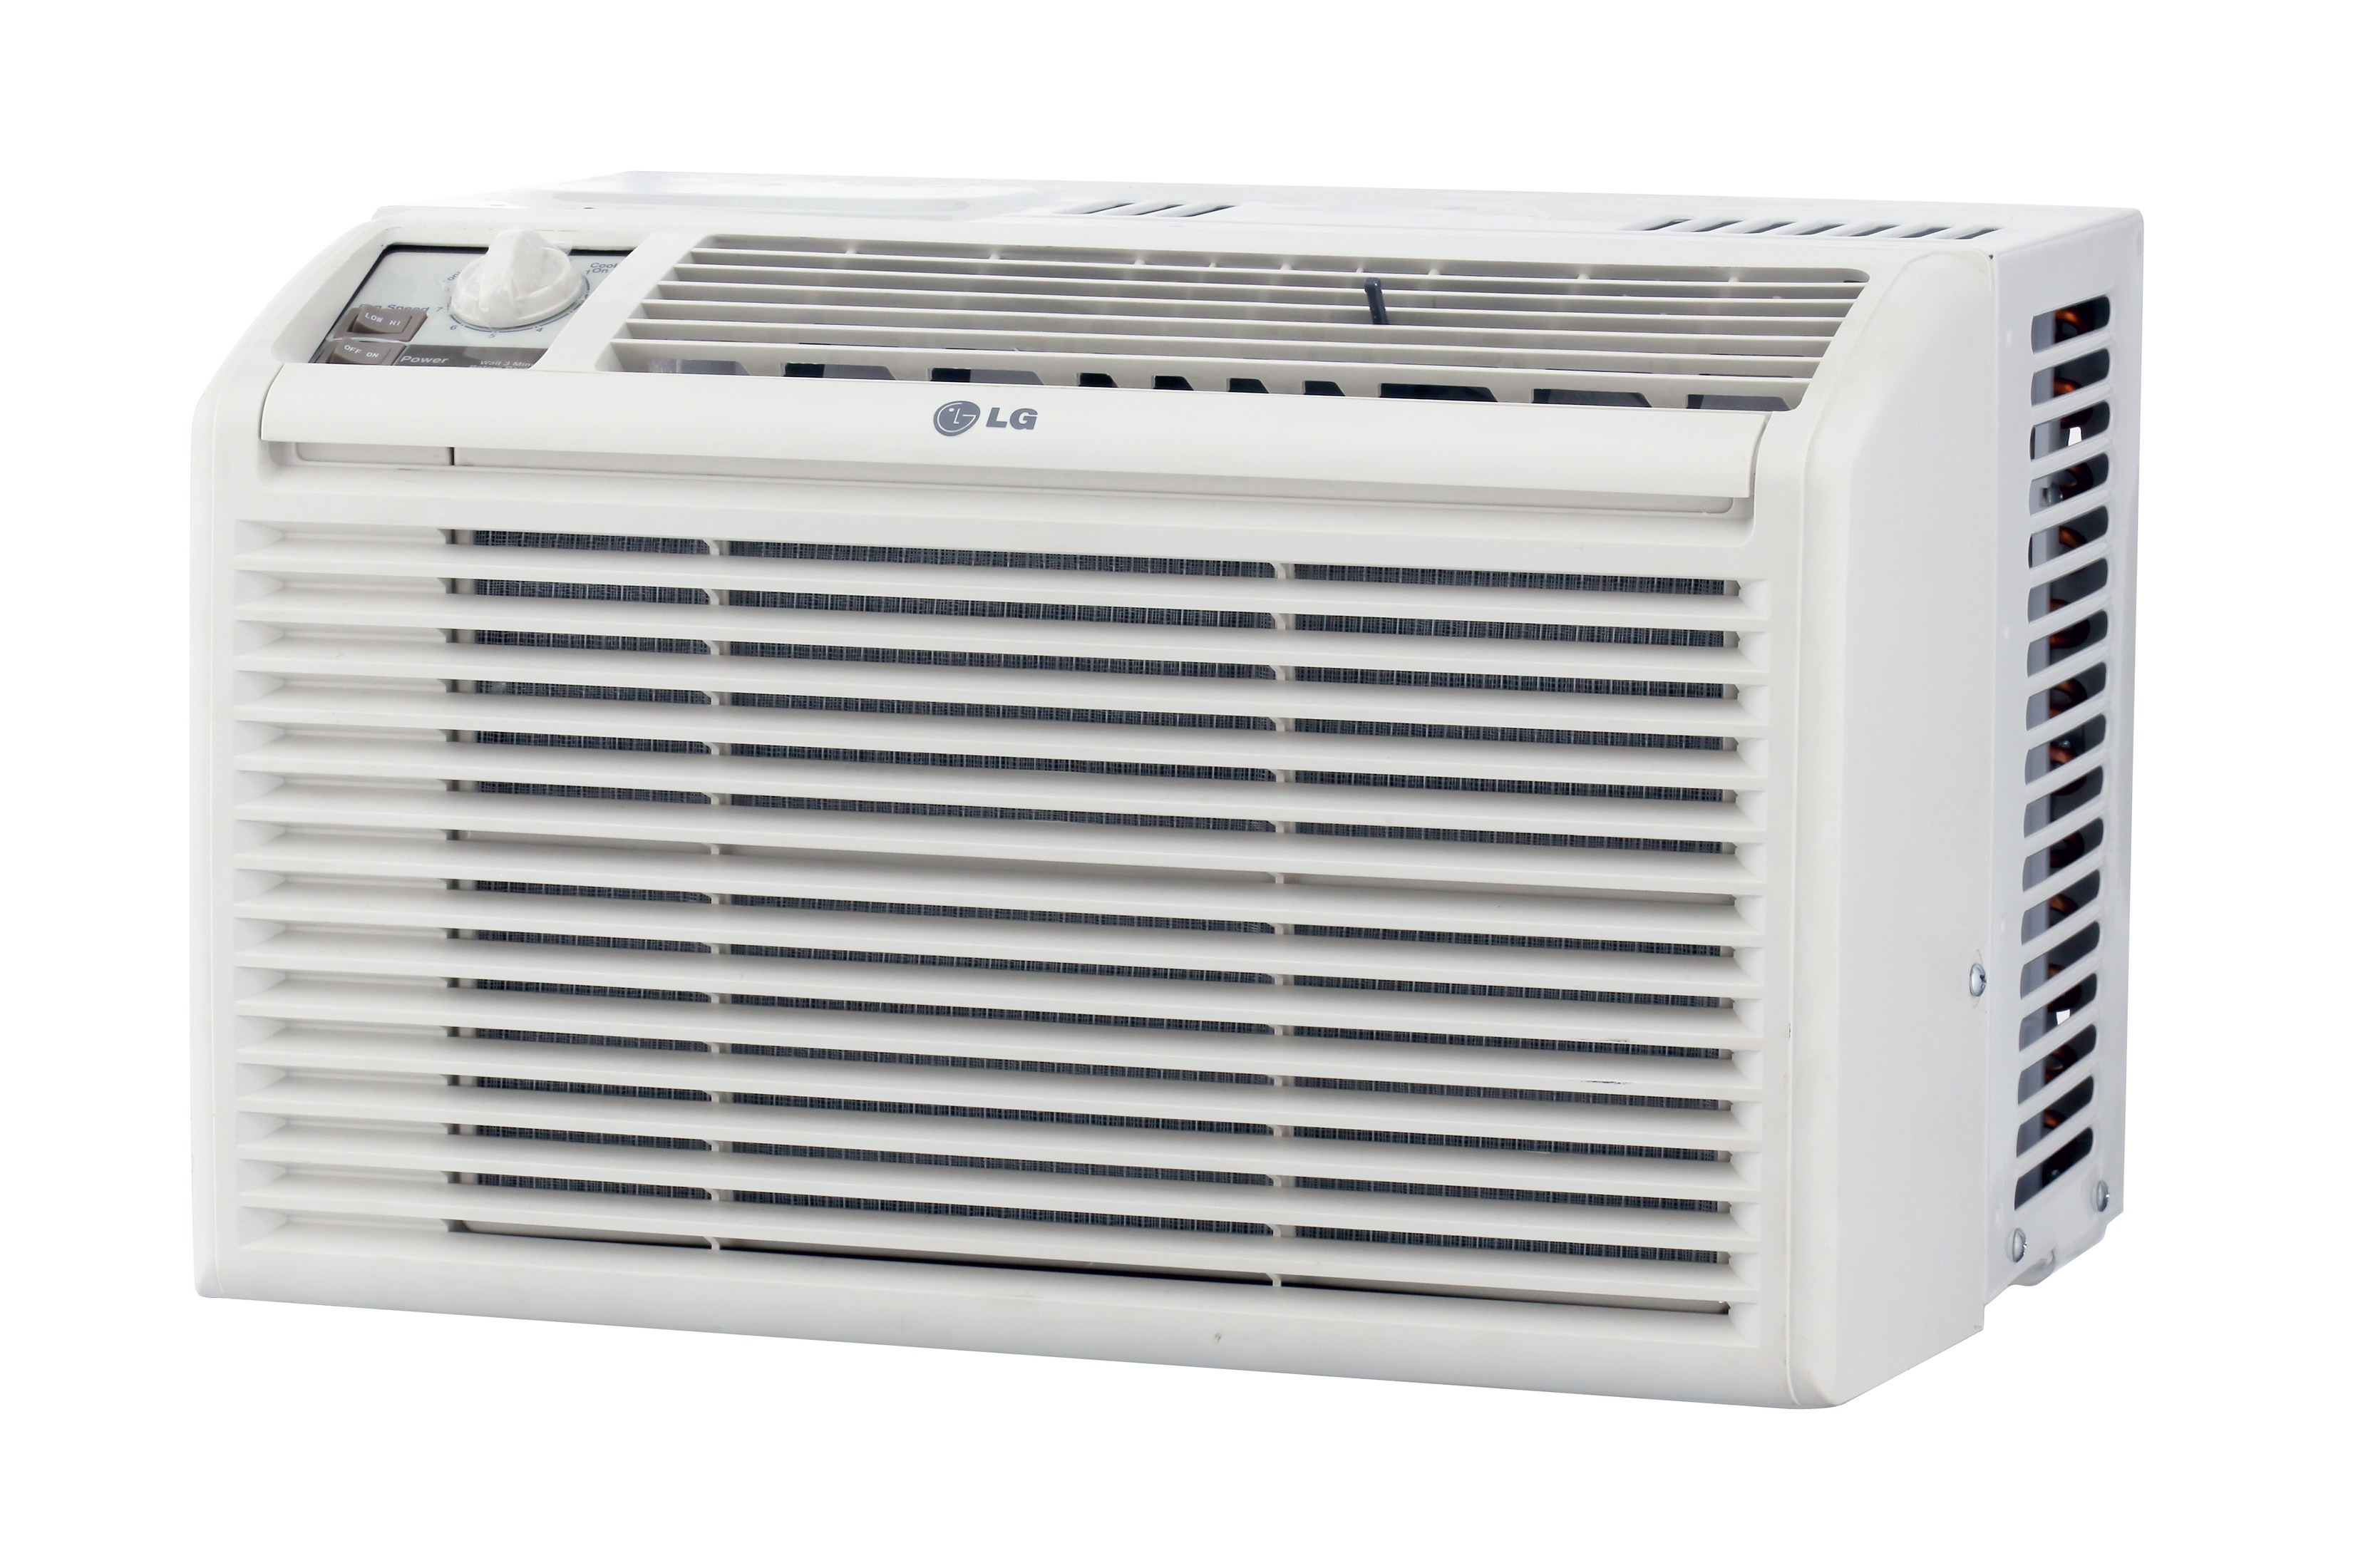 LG 5,000 115V BTU Window Air Conditioner, Cools 150 Sq.Ft. (10' x 15' Room Size) - image 2 of 10